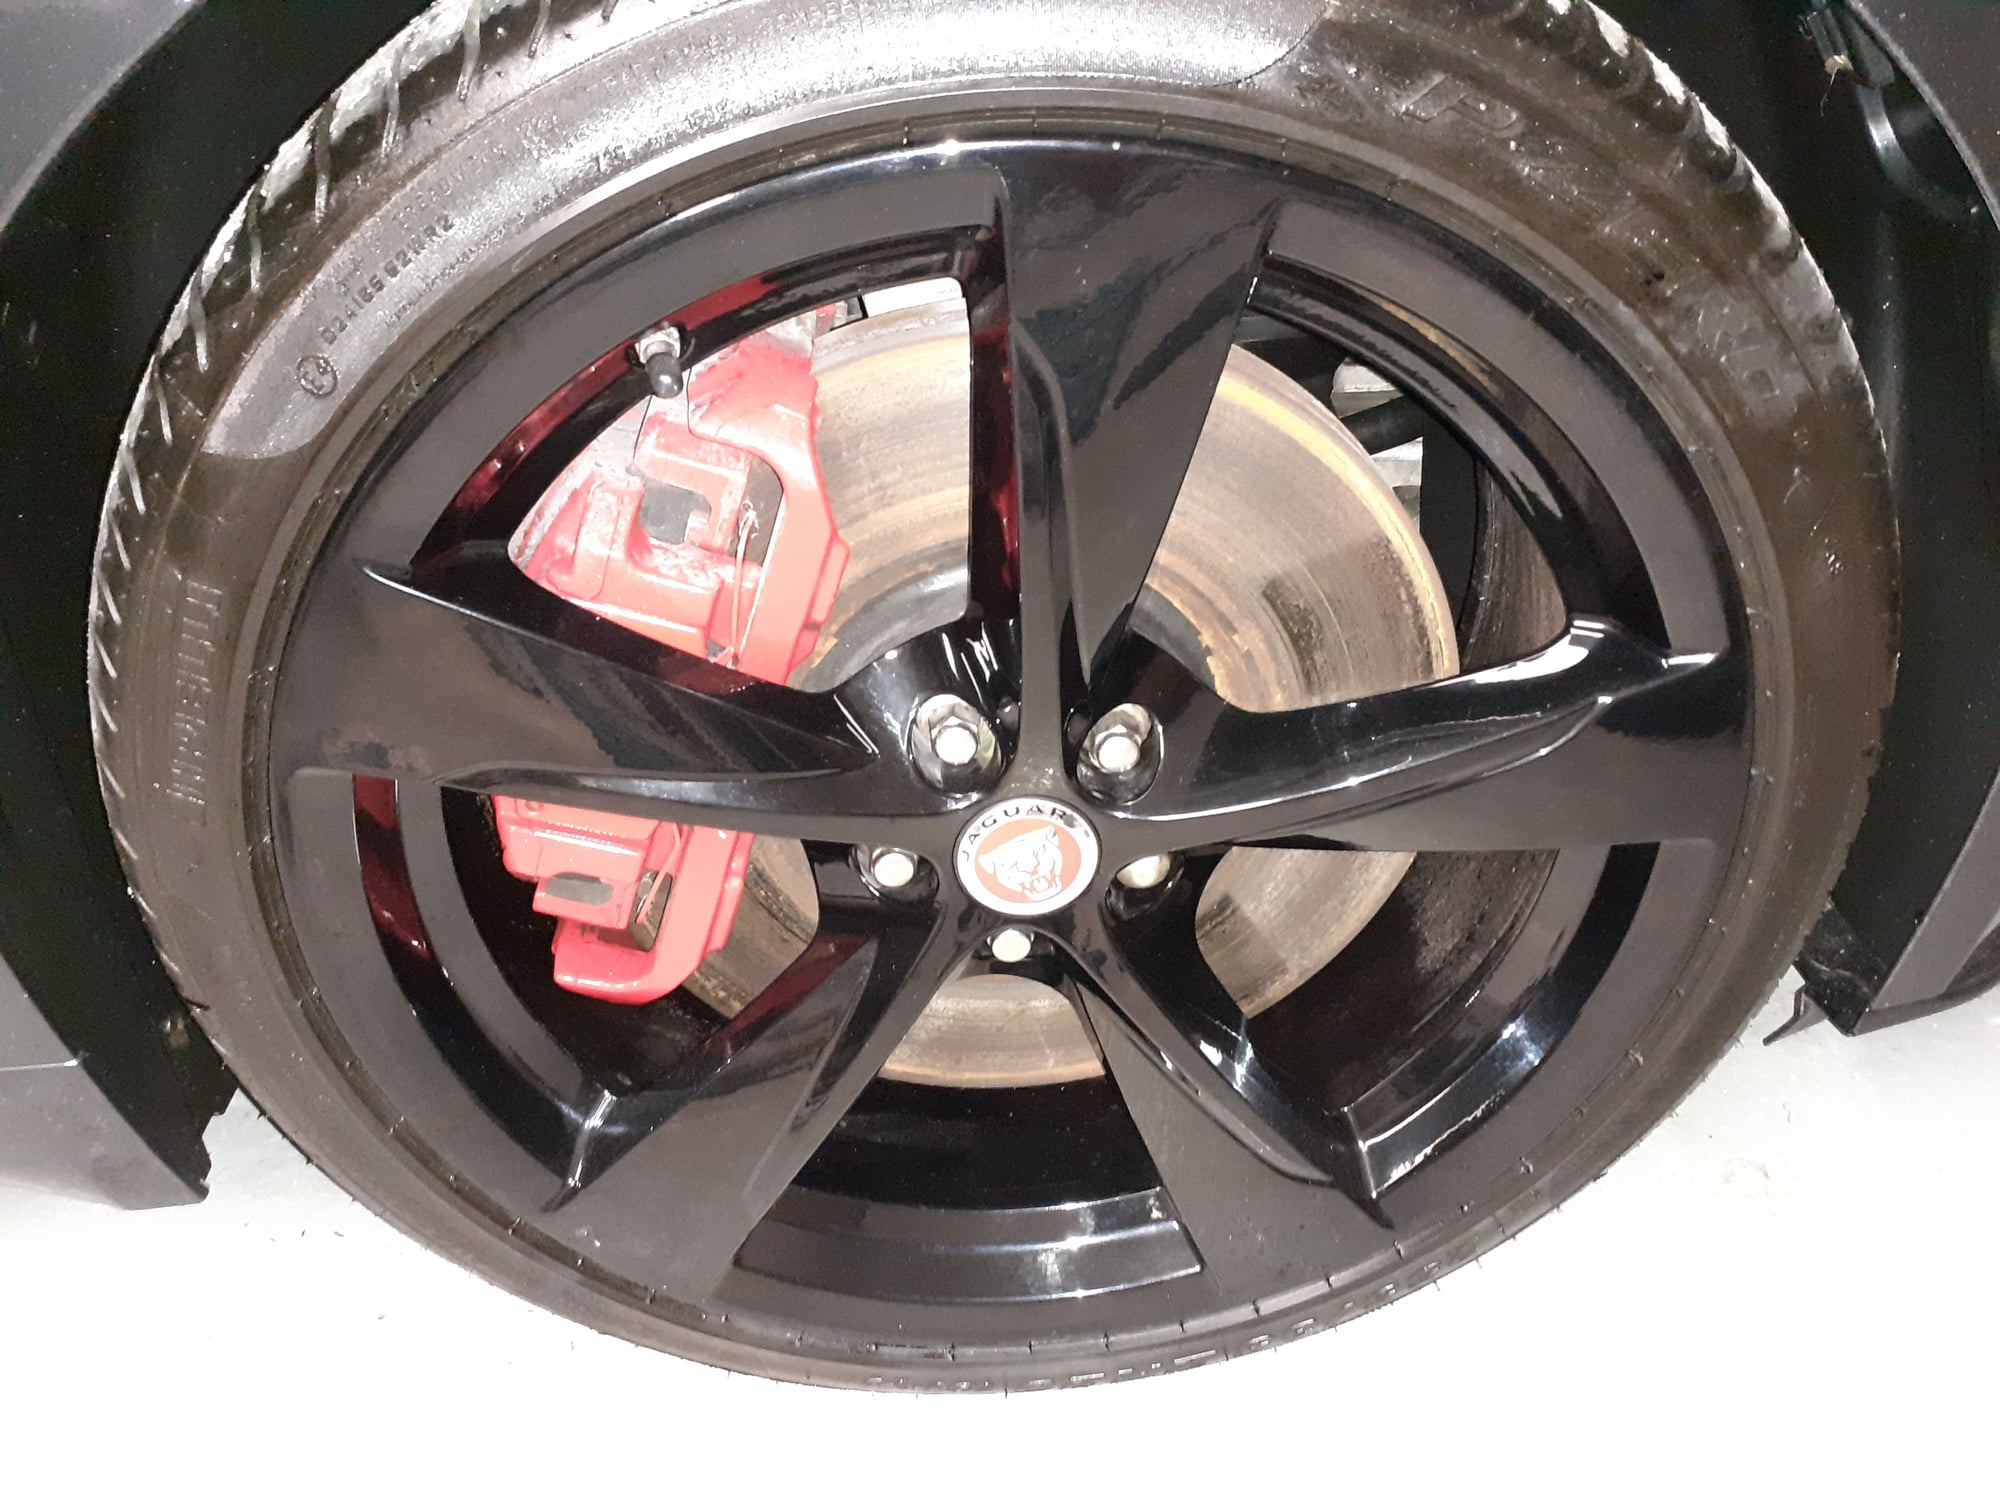 Wheels and Tires/Axles - Immaculate 20 inch gloss black alloys and virtually new tyres - Used - All Years Jaguar F-Type - West Sussex RH20 4, United Kingdom